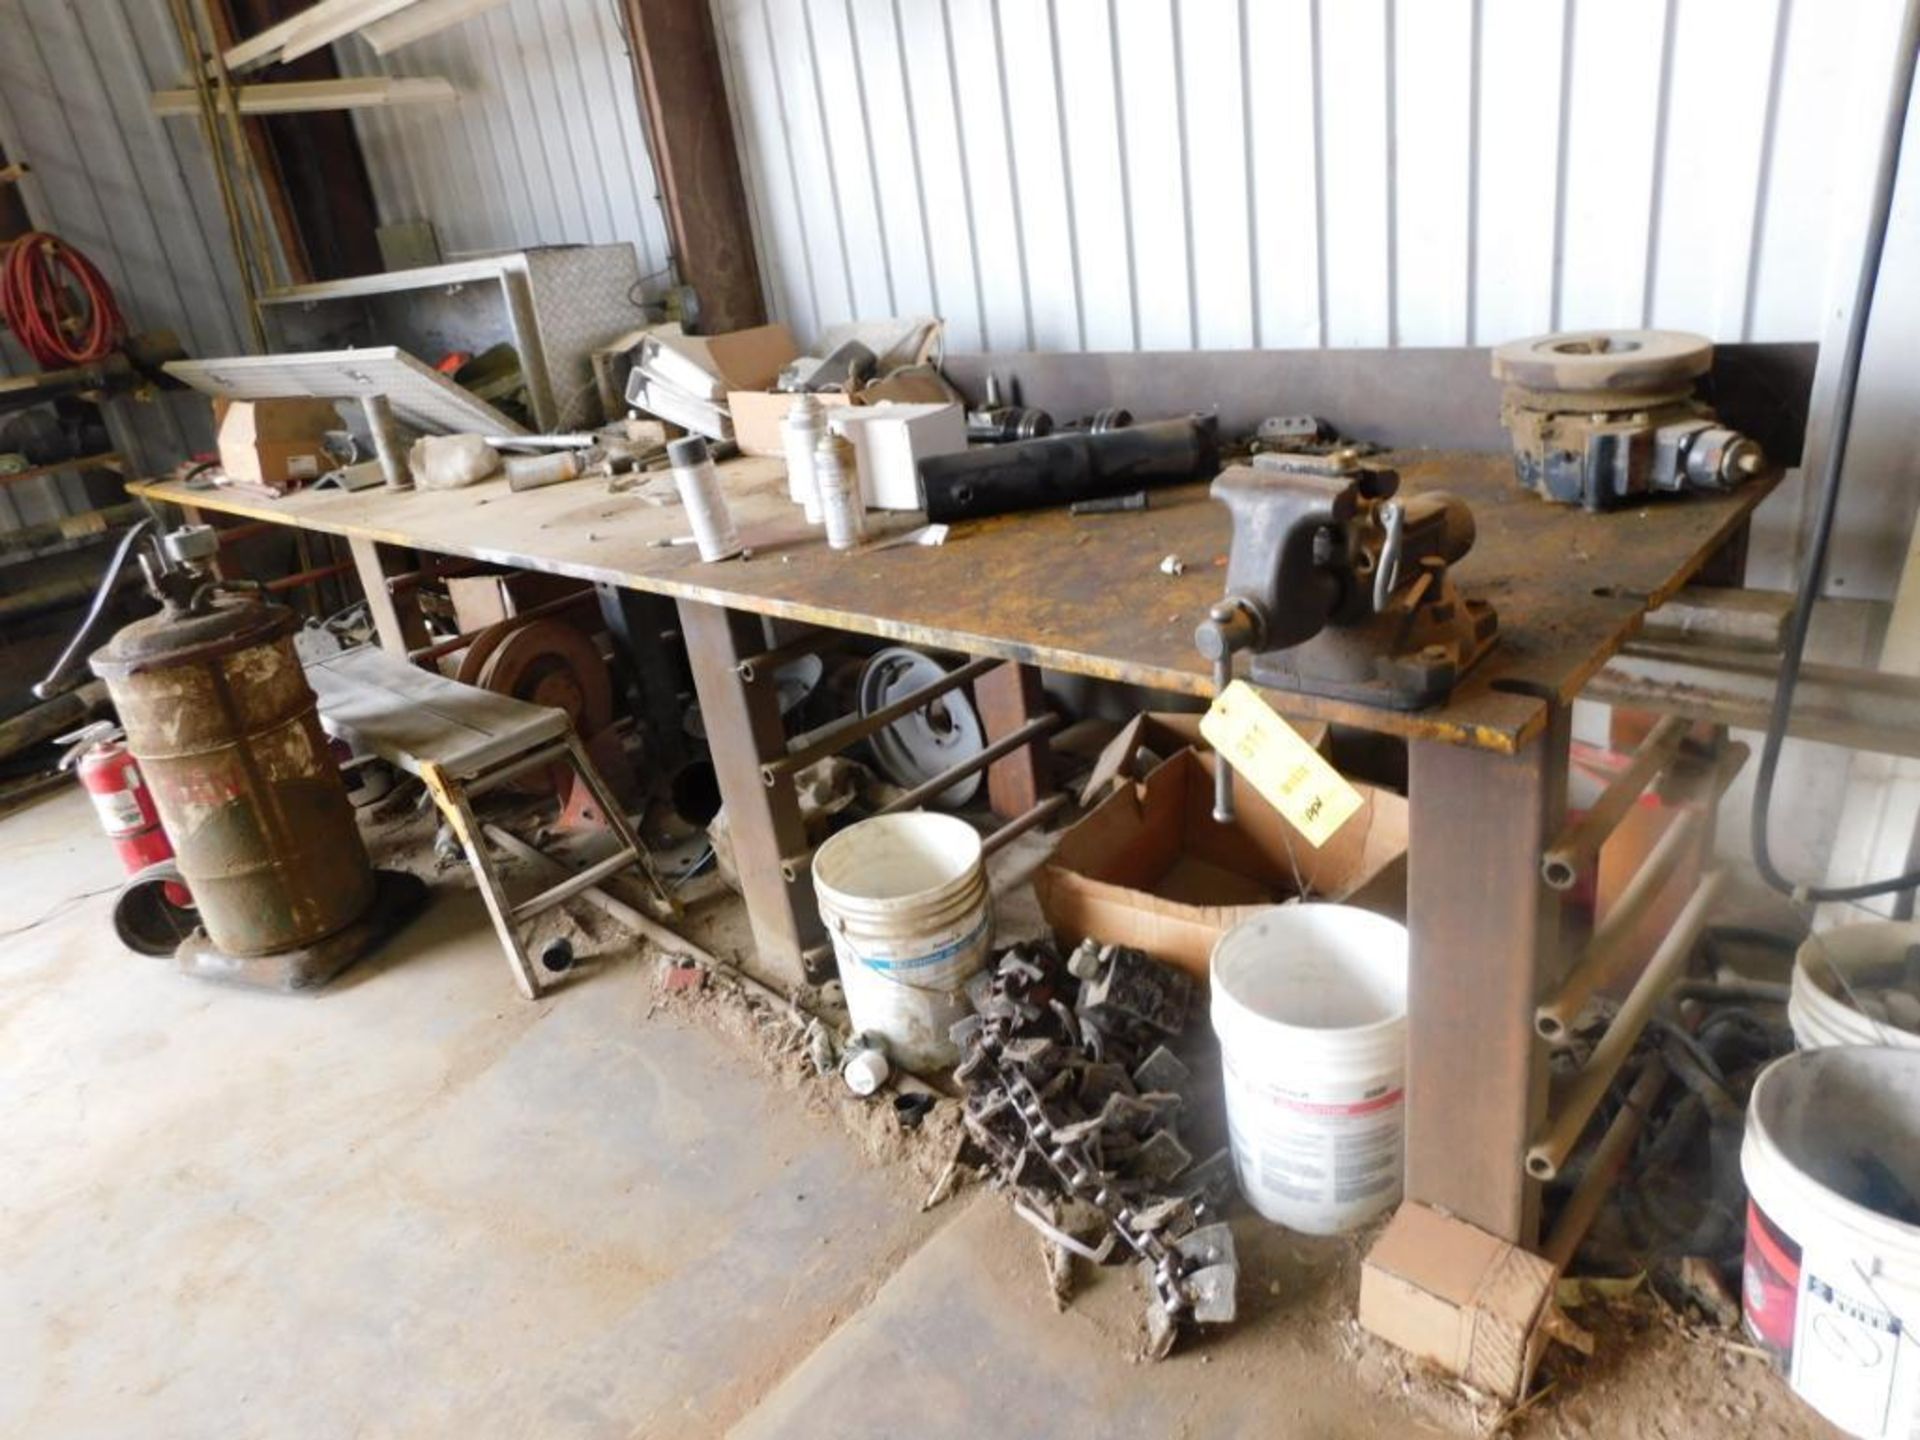 LOT: 40 in. x 172 in. x 1 in. Steel Work Bench with Vise & Contents of Assorted Hardware